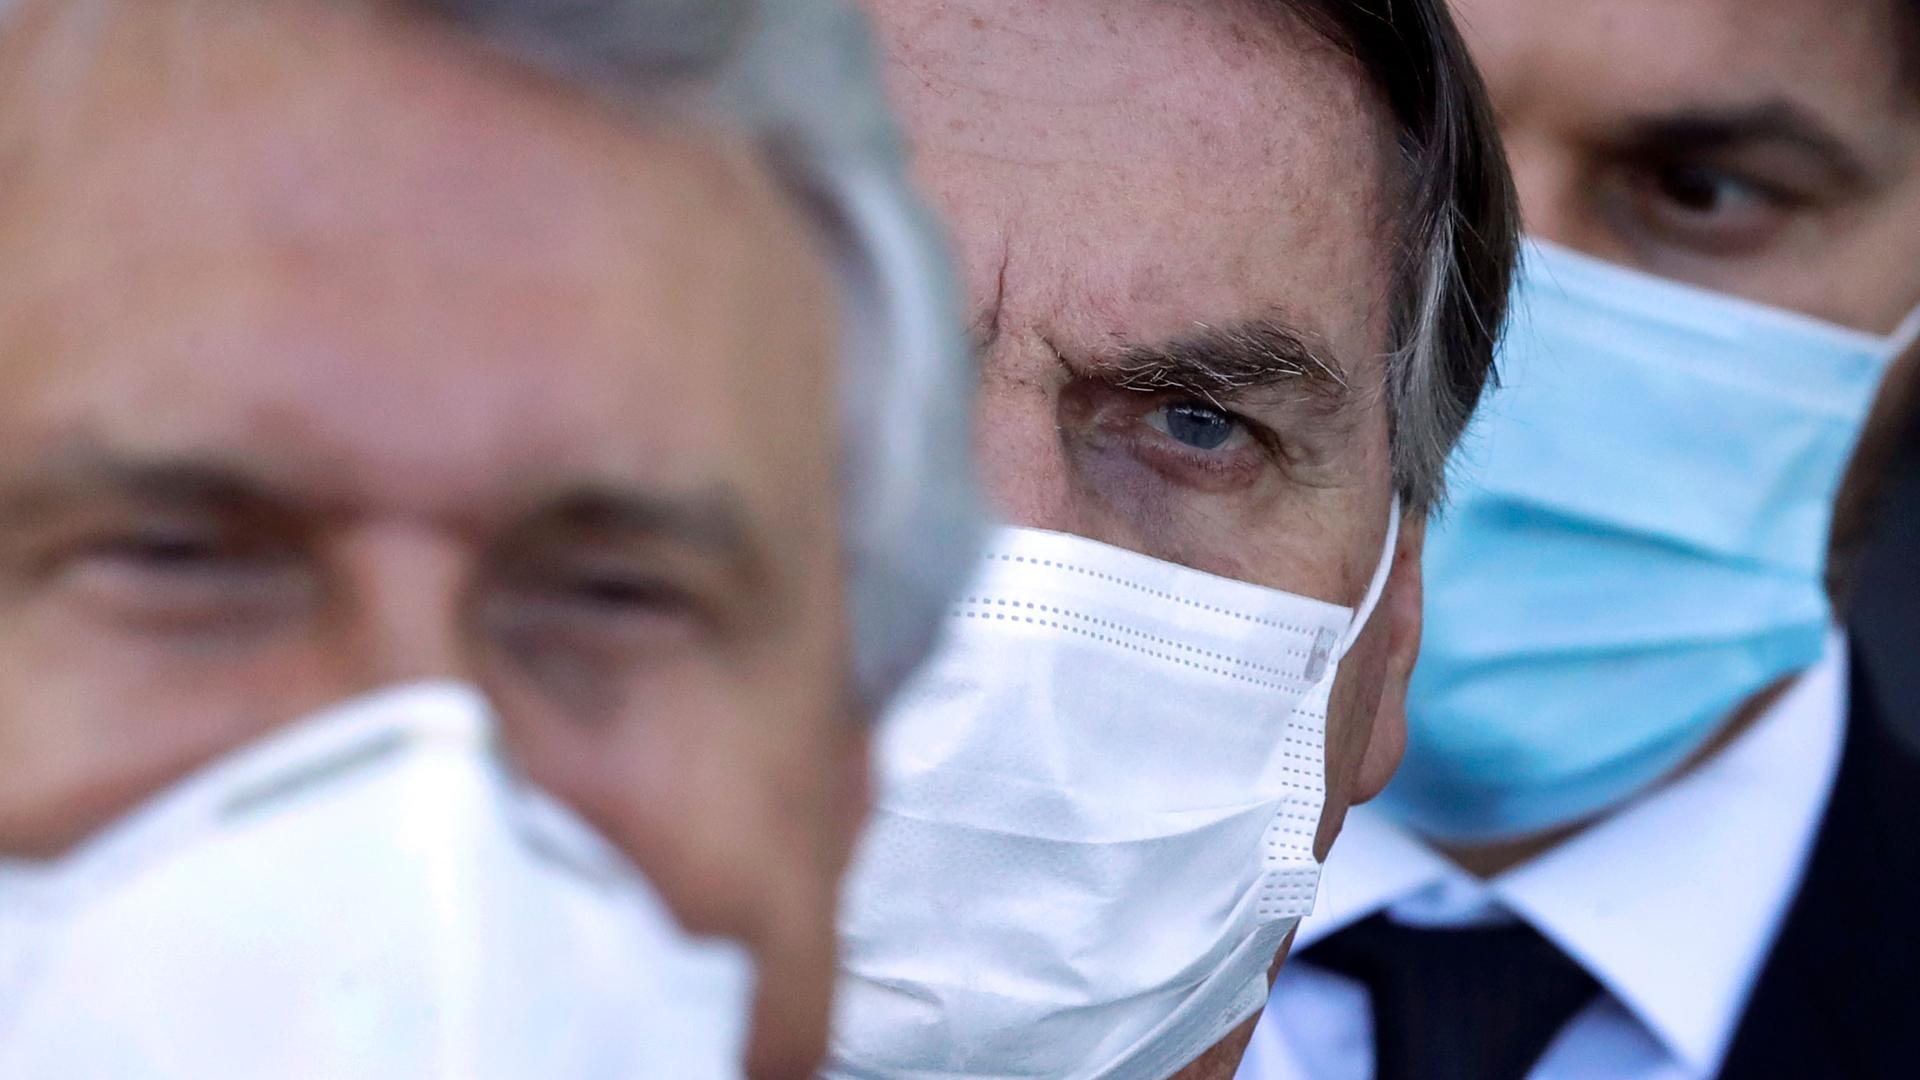 Brazilian President Jair Bolsonaro is pictured in a close up photograph showing only his face covered by a medical face mask.